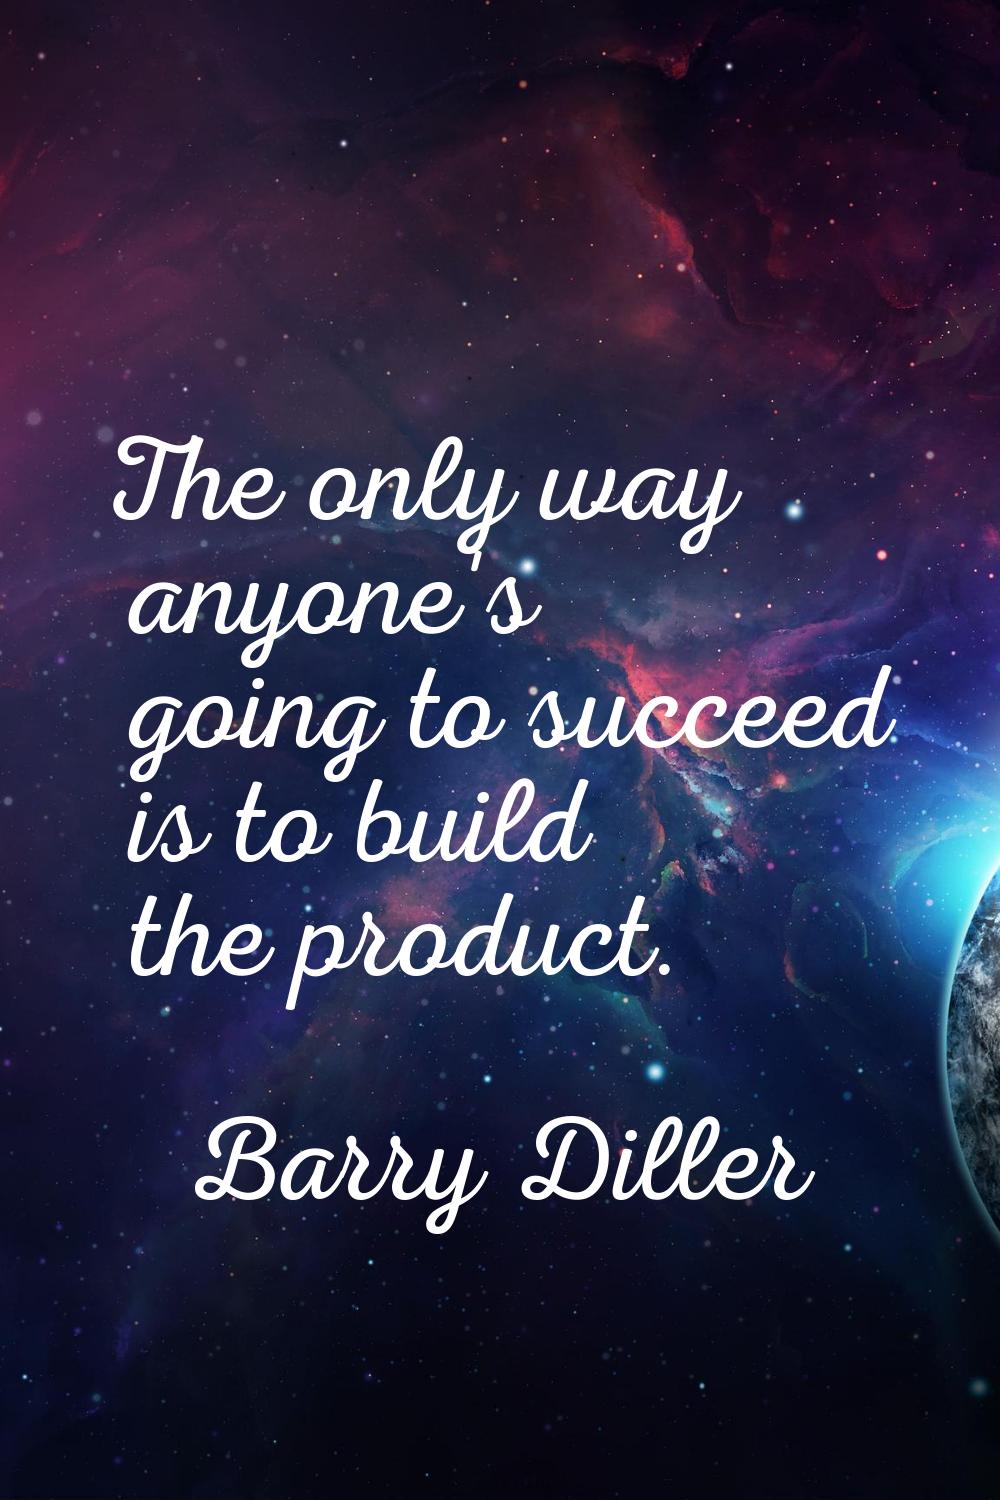 The only way anyone's going to succeed is to build the product.